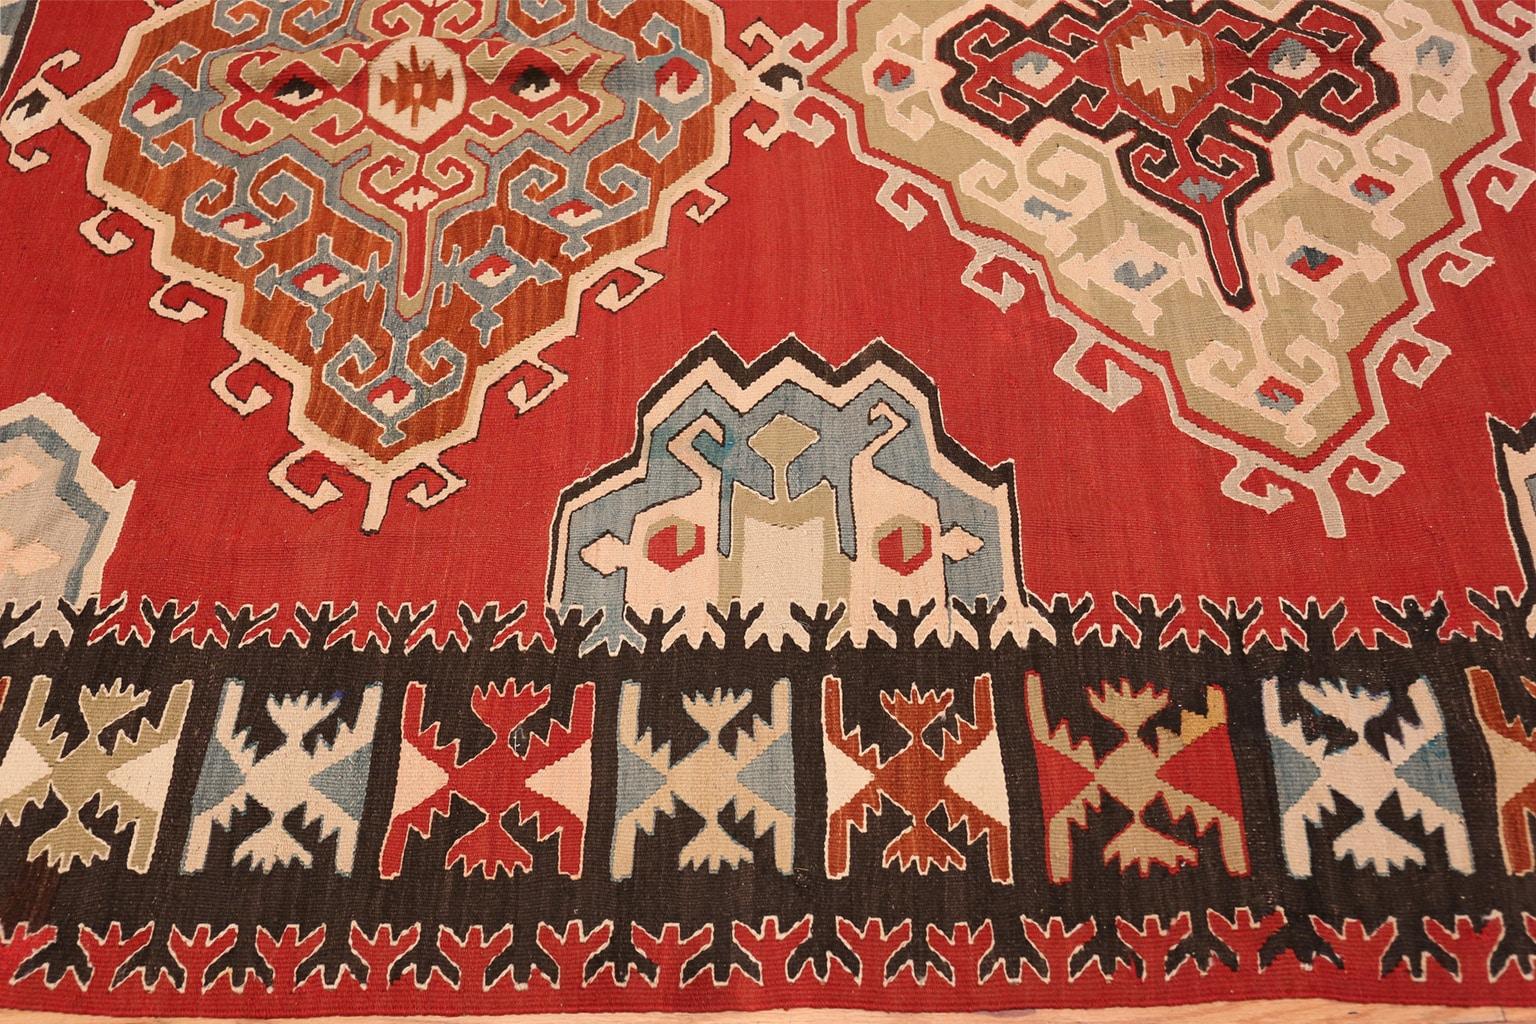 Red background tribal design vintage Turkish Kilim rug, country of origin: Turkey, circa second quarter of the 20th century - Size: 6 ft 9 in x 10 ft 3 in (2.06 m x 3.12 m). True to the striking tribal vintage rug style of Turkish Kilim rugs, this